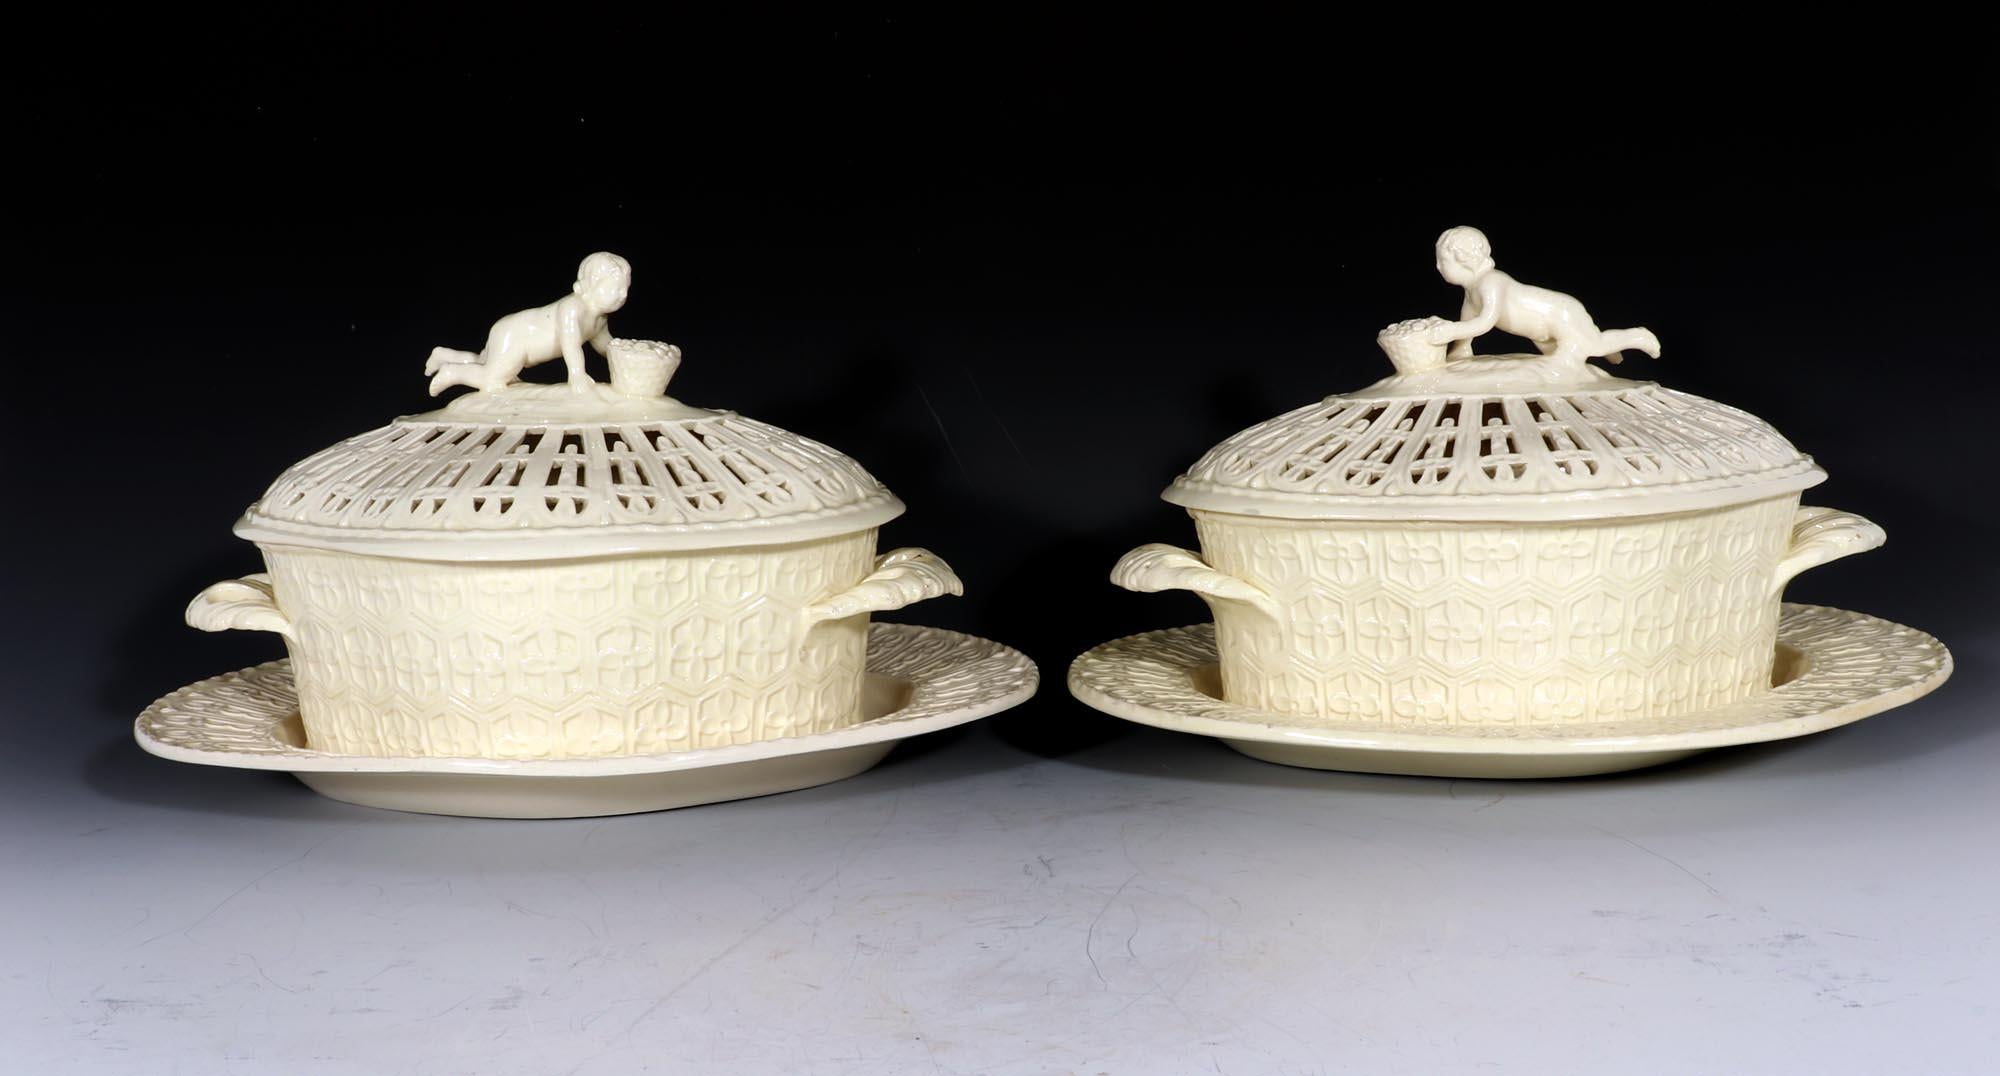 Georgian John Heath Creamware Chestnut Covered Baskets and Stands with Figural Finial